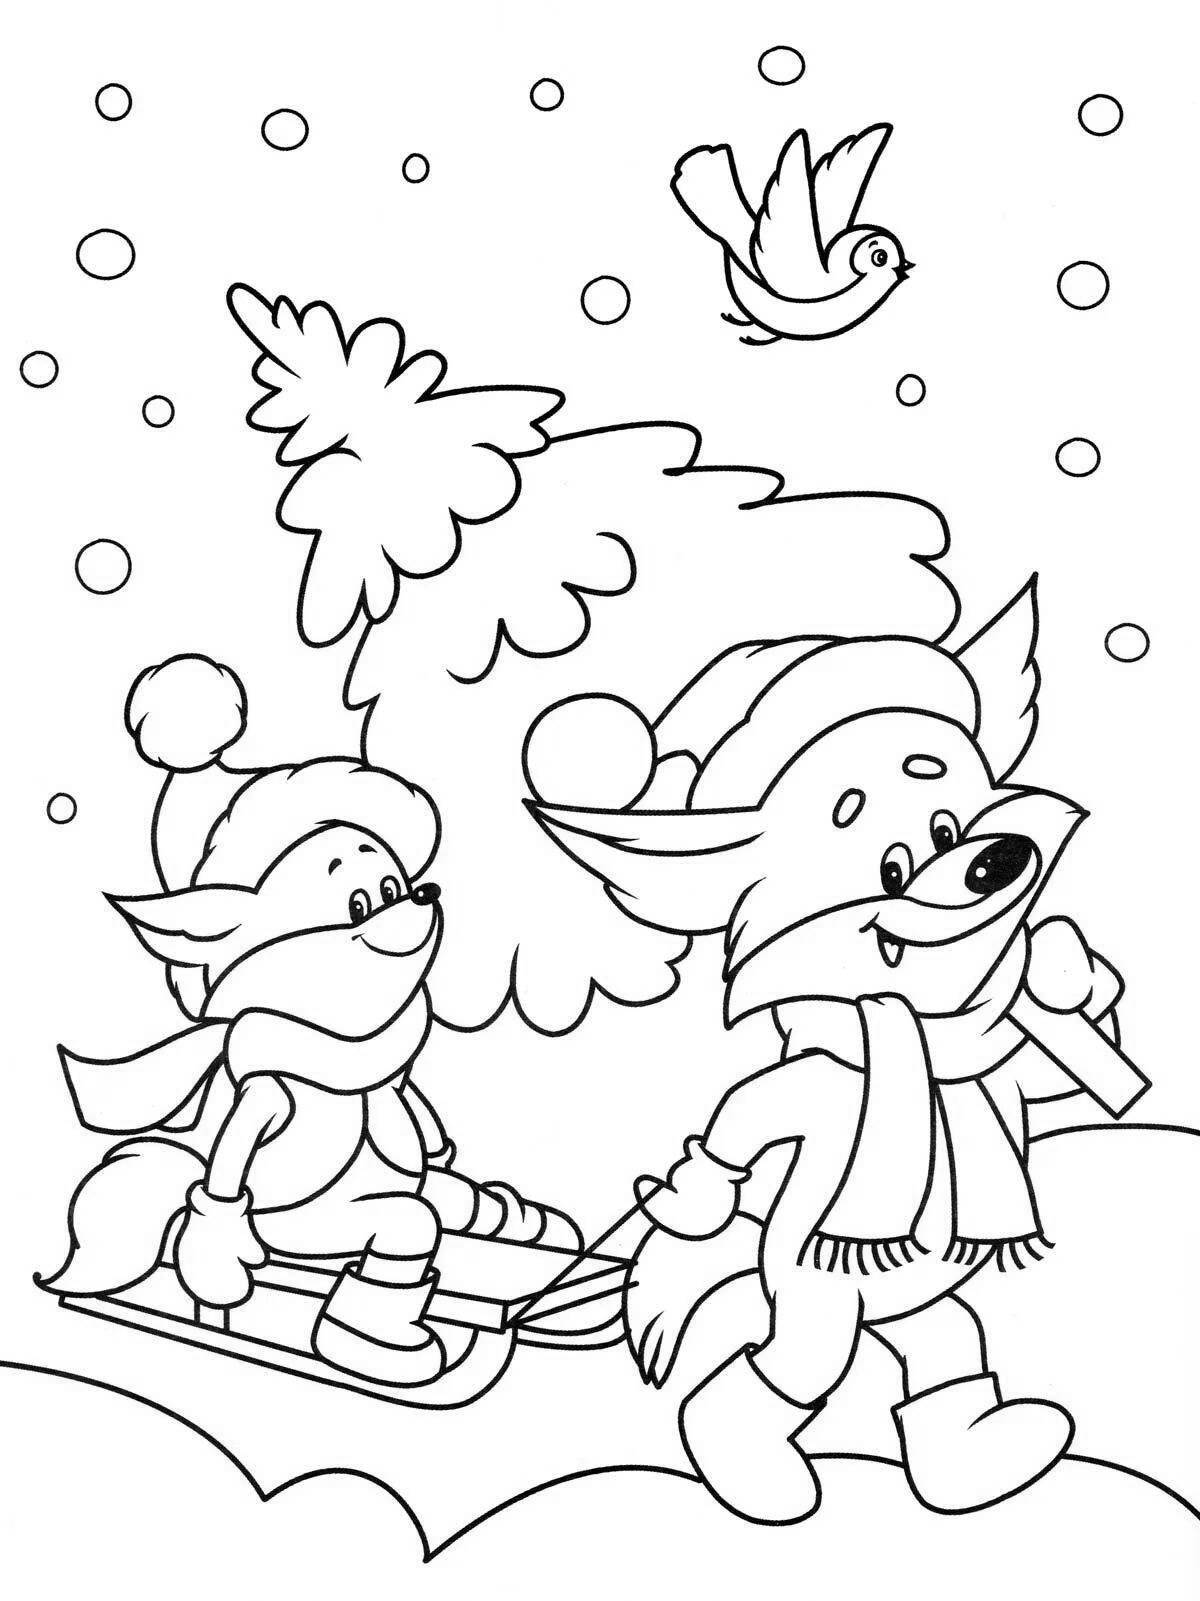 Great winter coloring book for 3-4 year olds